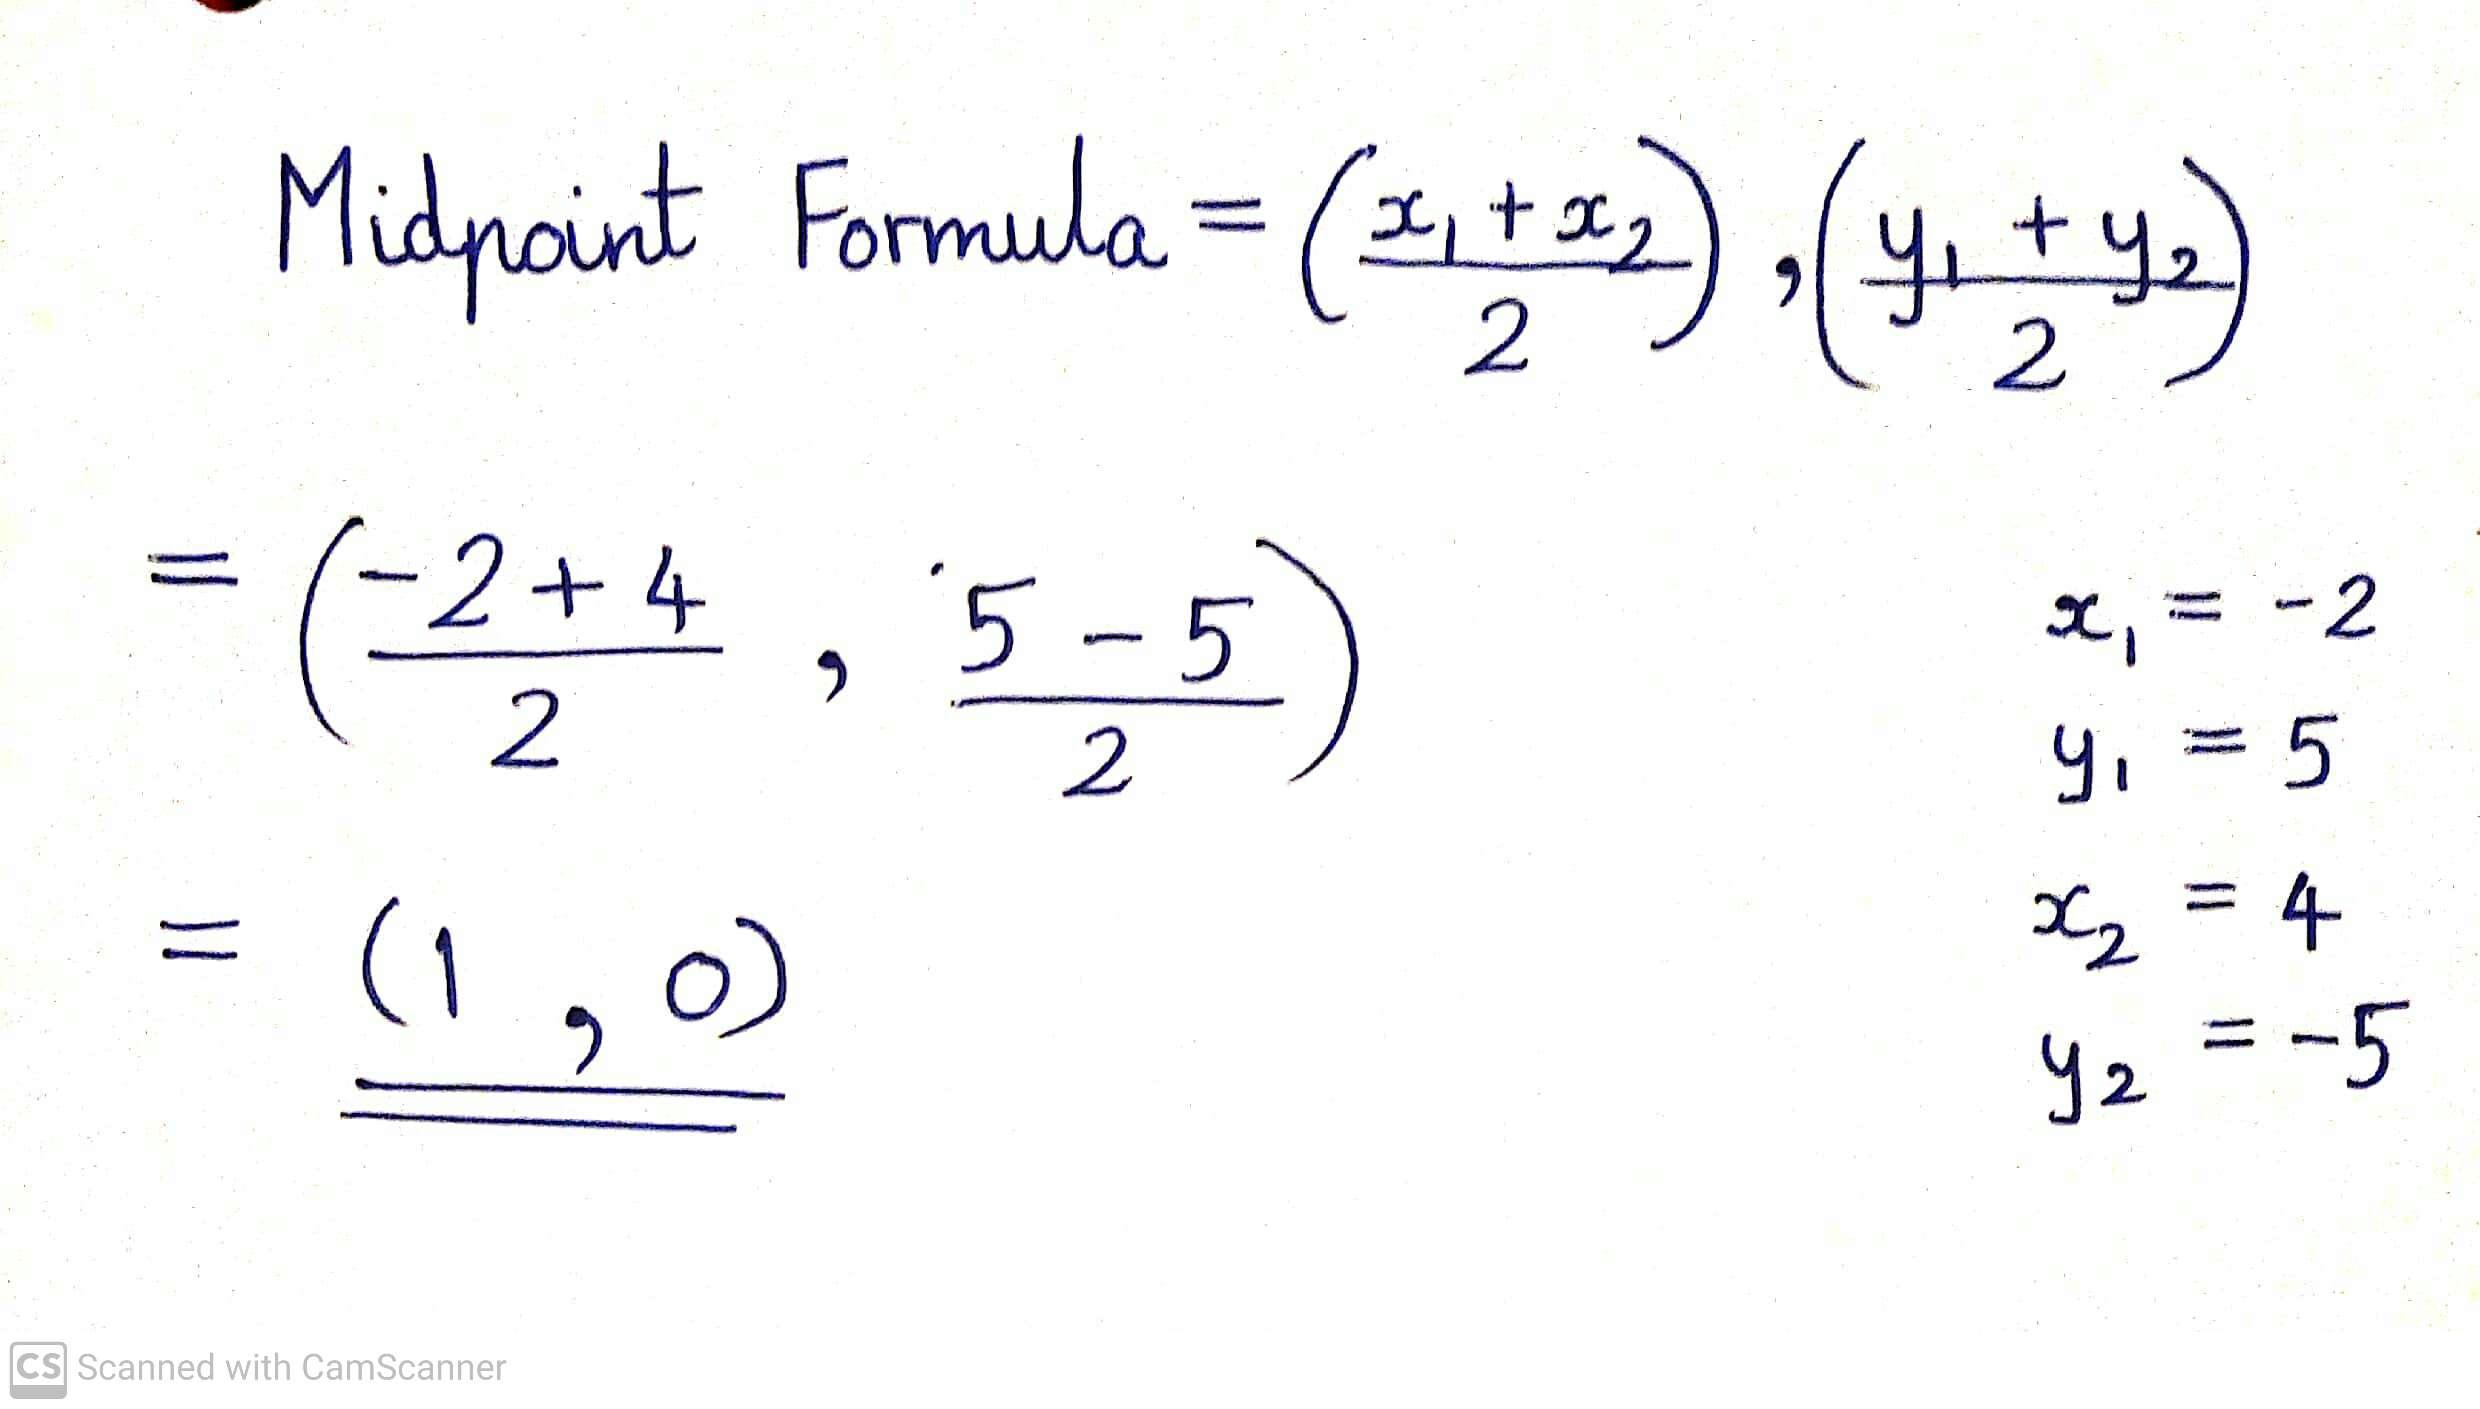 What Is The Midpoint Of AB When A (-2, 5) And B (4, -5)?